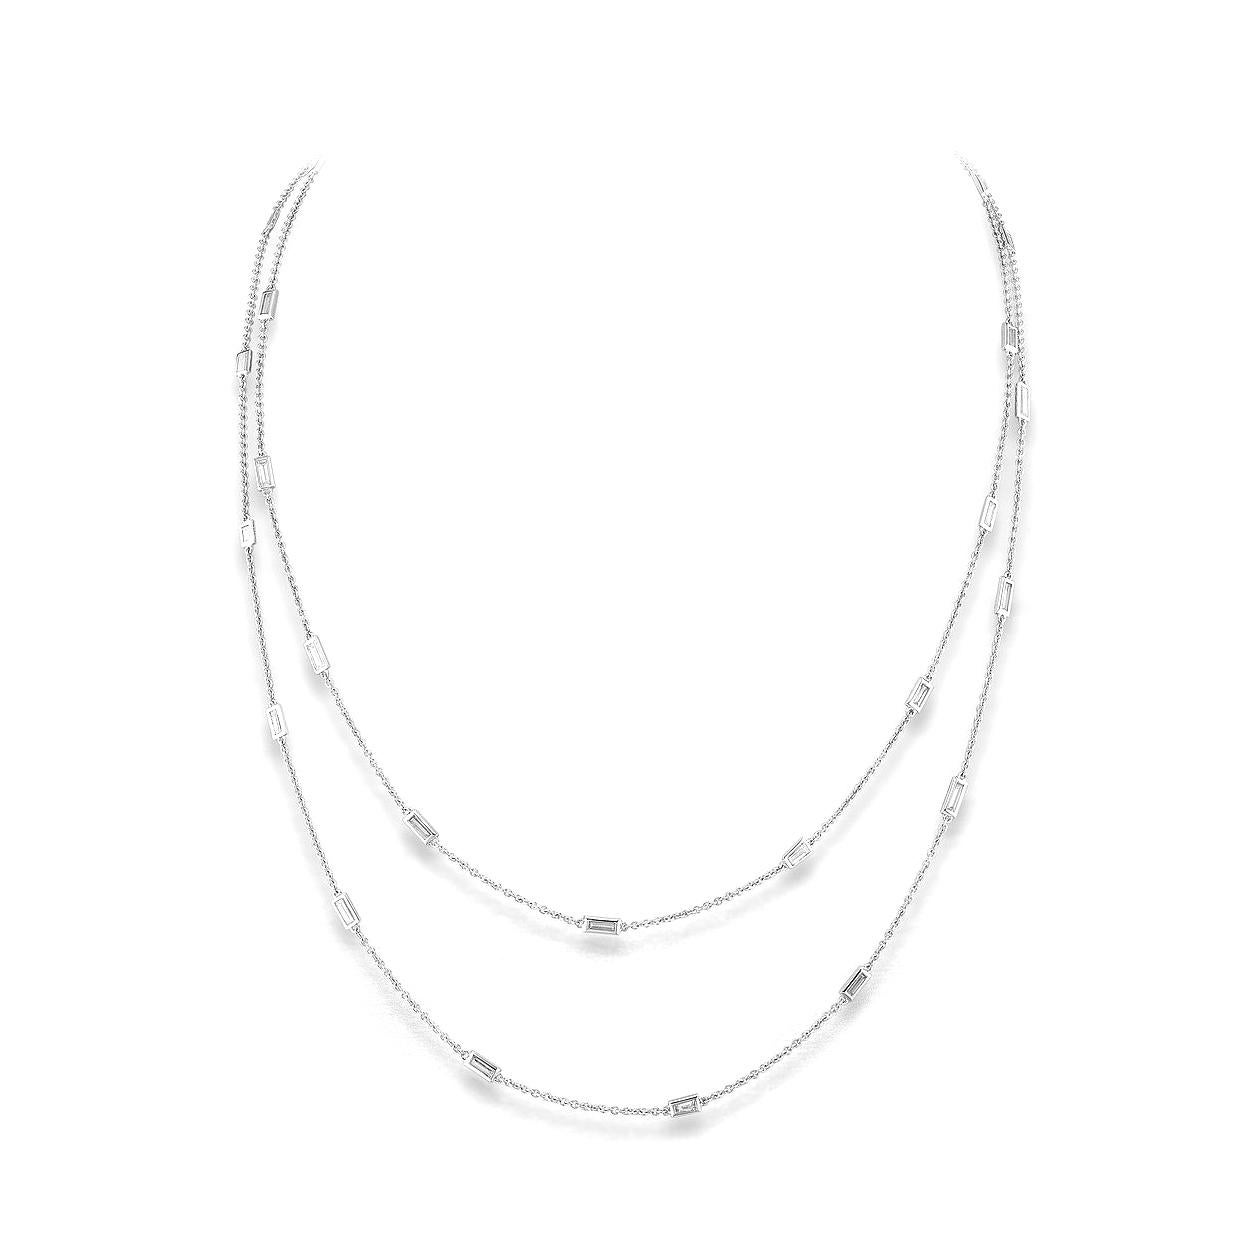 Necklace in 18kt white gold set with 31 baguette cut diamond 5.71 cts (120 cm)